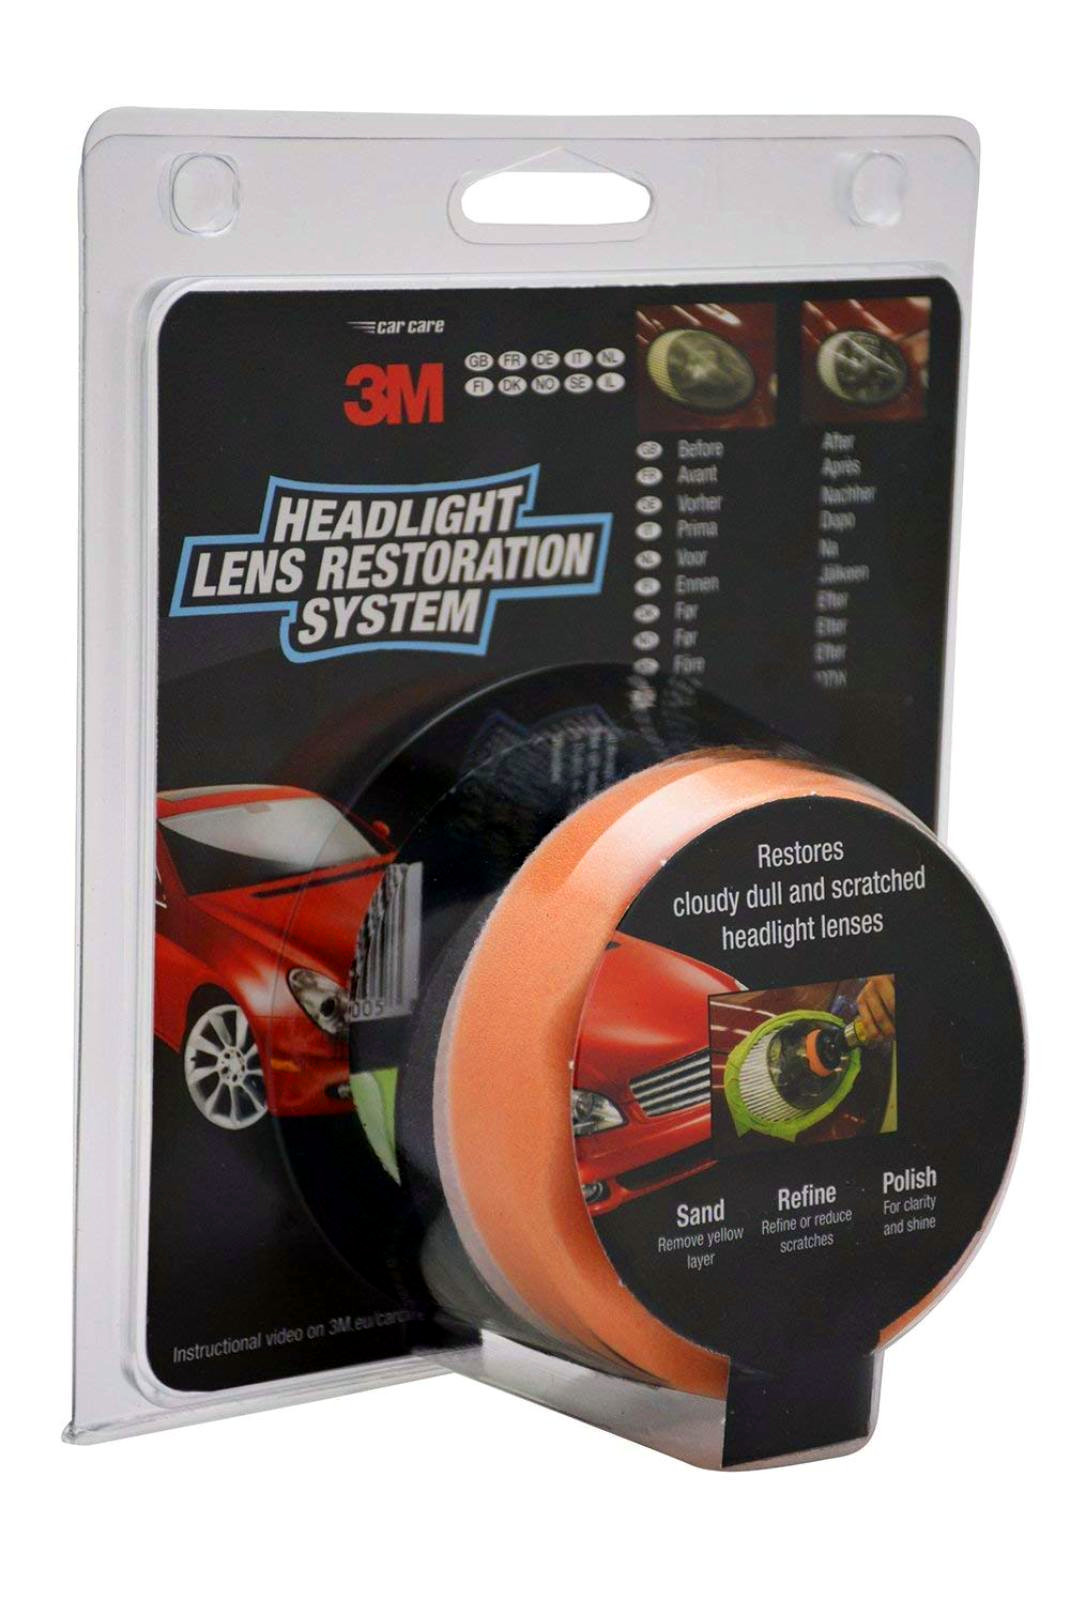 3m-headlight-restoration-kit-polish-your-headlamps-or-lens-with-a